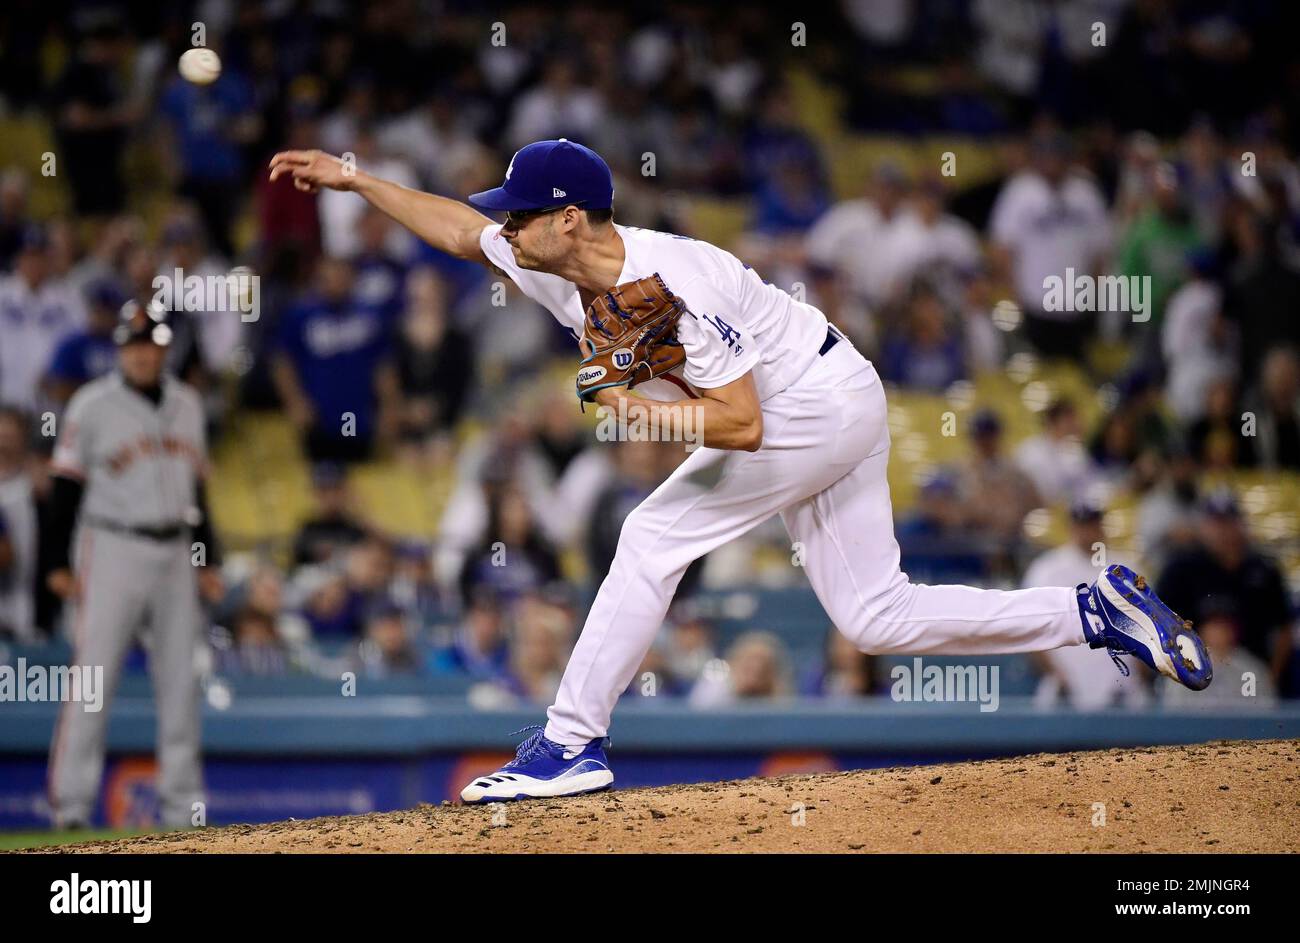 Los Angeles Dodgers relief pitcher Joe Kelly throws during the